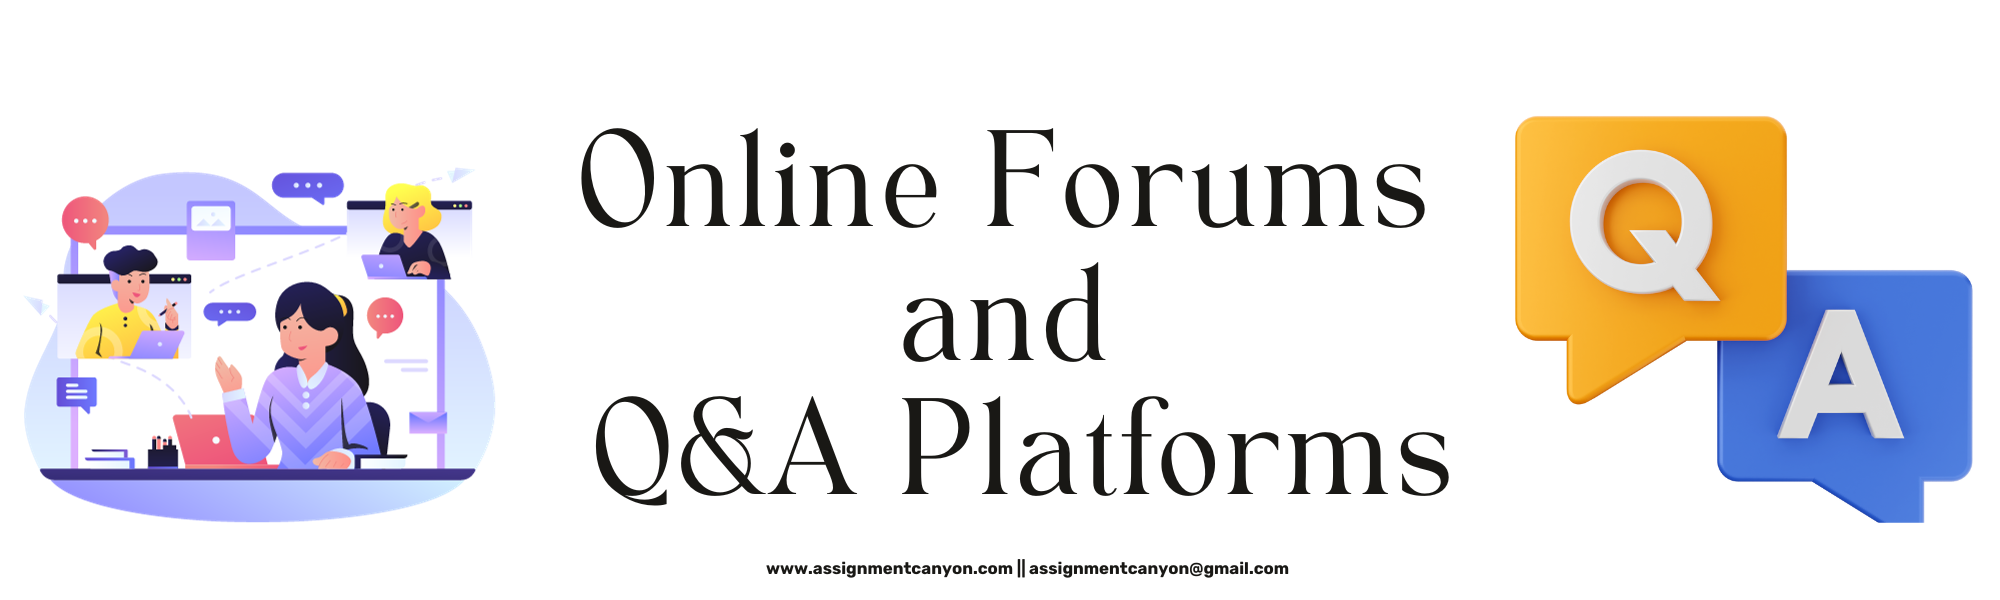 Online Forums and Q&A Platforms for finding assignment answers for college students 